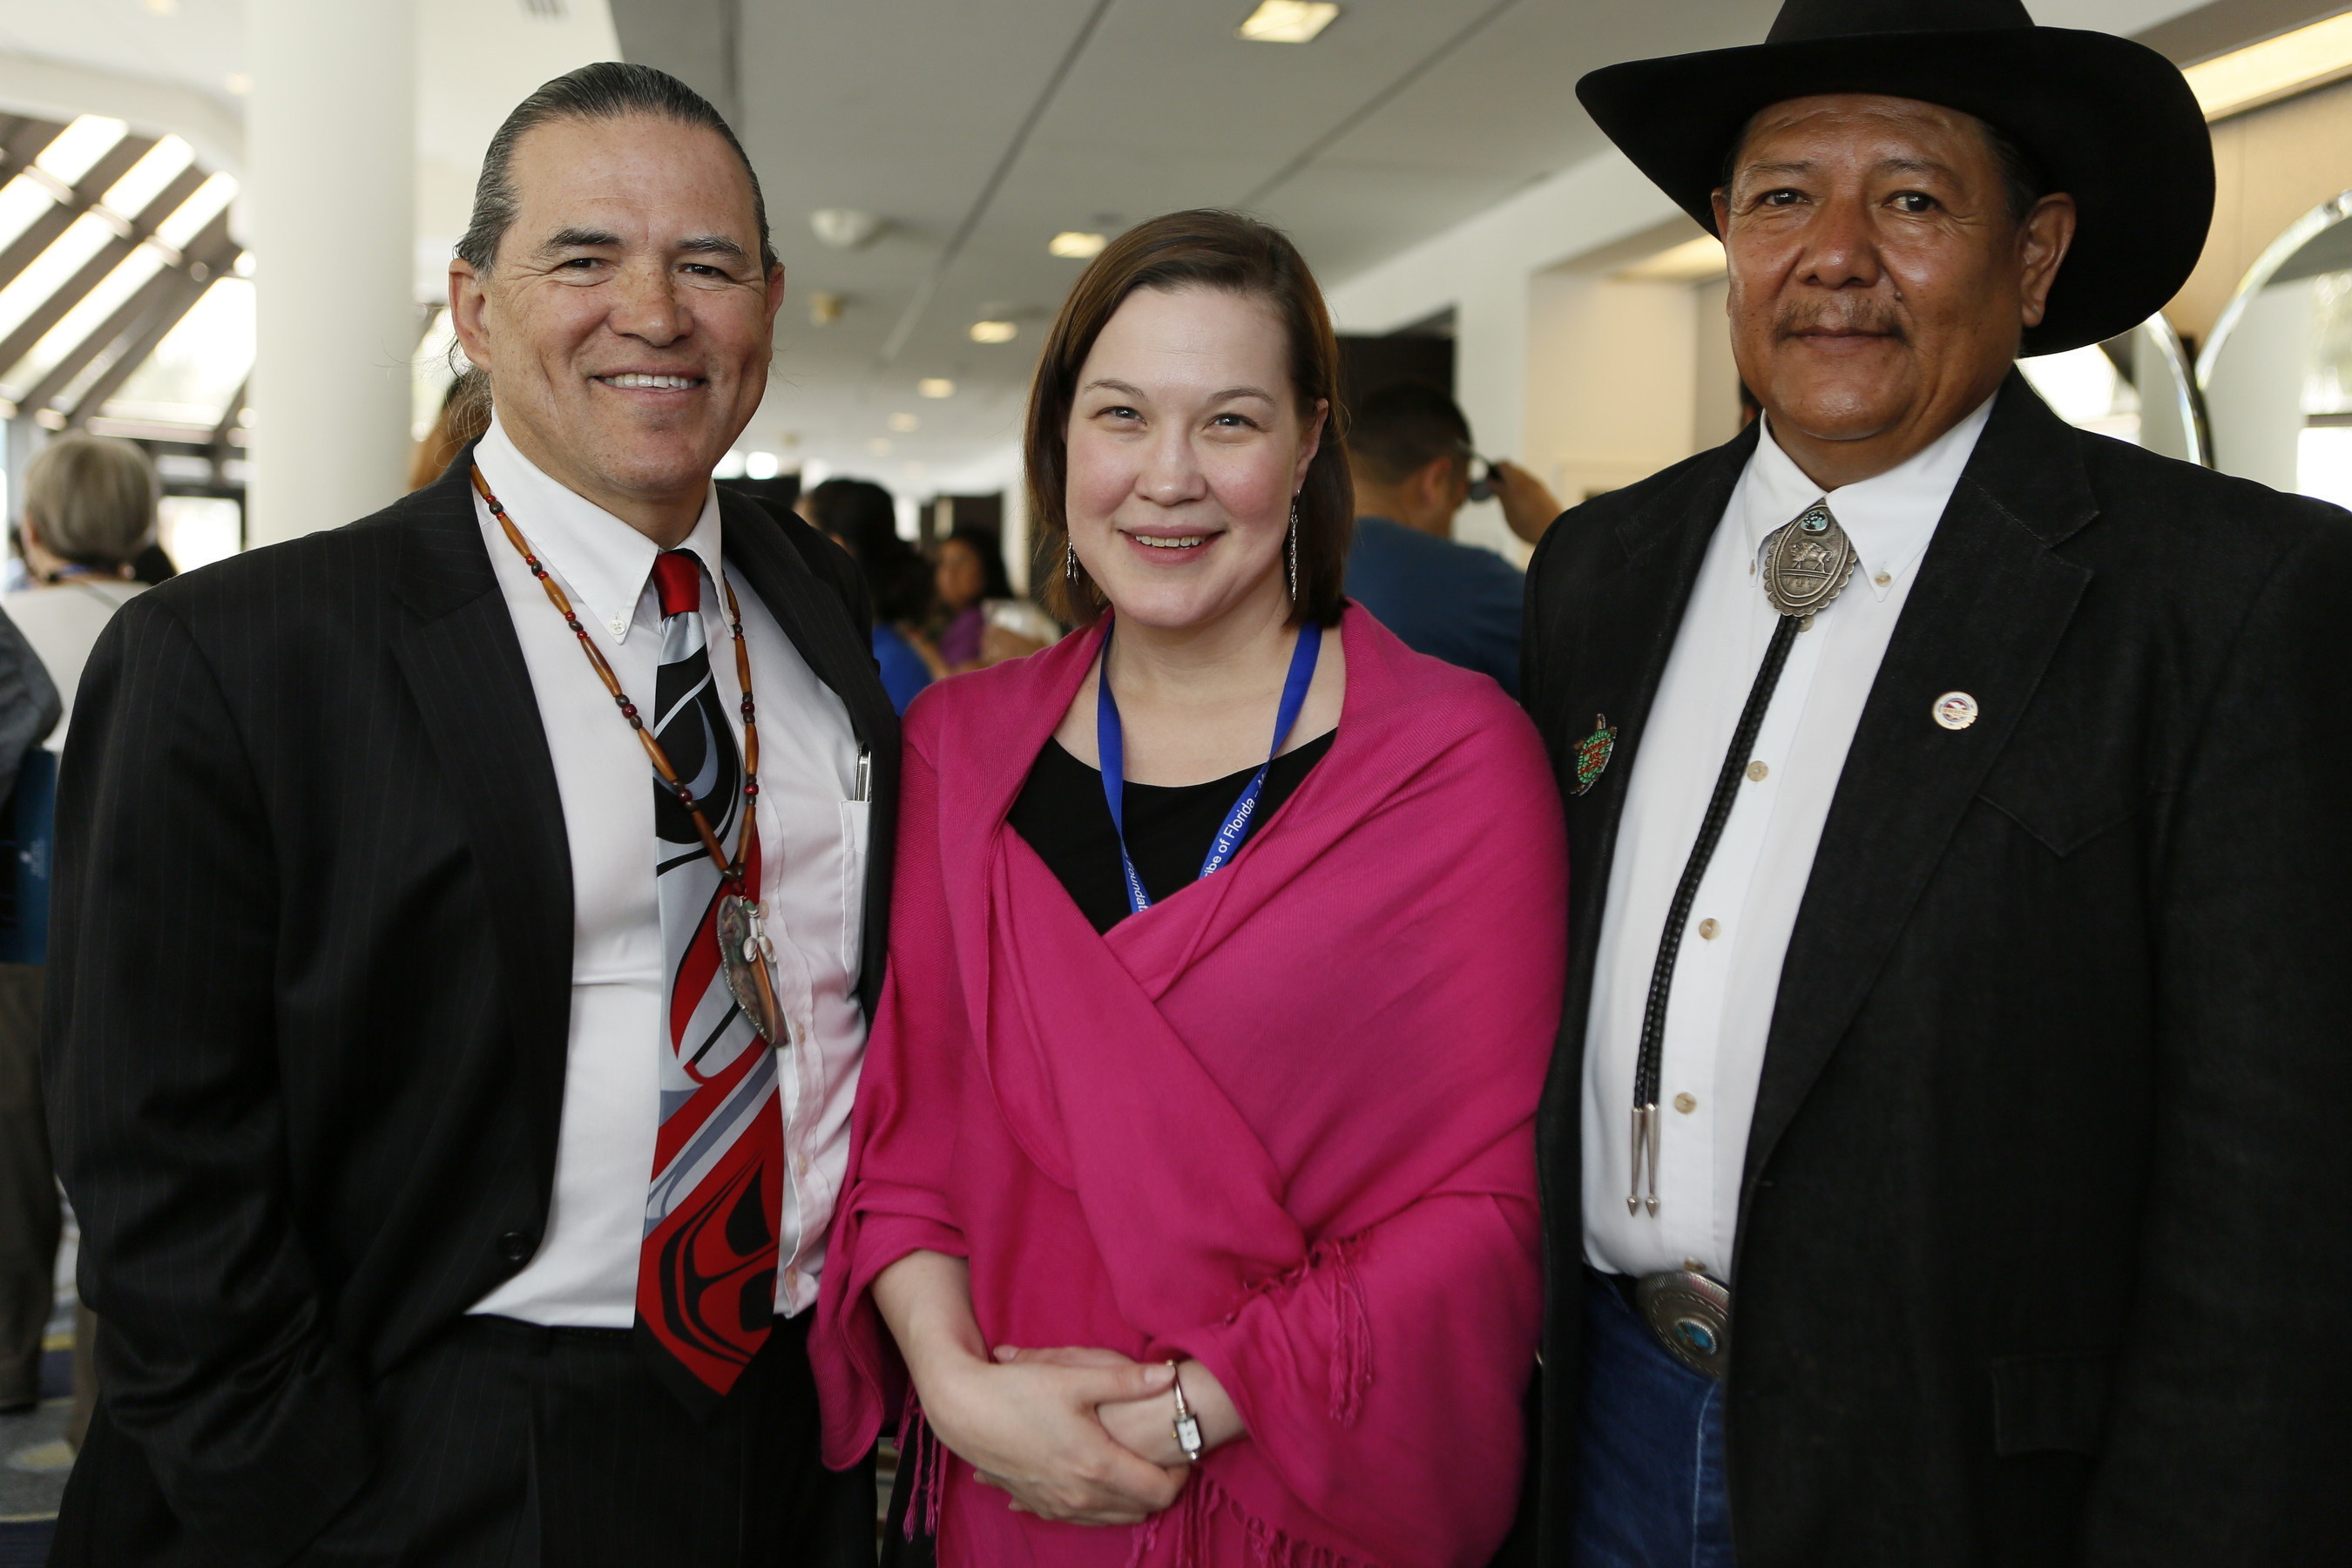 NICWA Executive Director Sarah Kastelic (center) is pictured with NCAI President Brian Cladoosby (left) and NICWA President Gil Vigil (right).